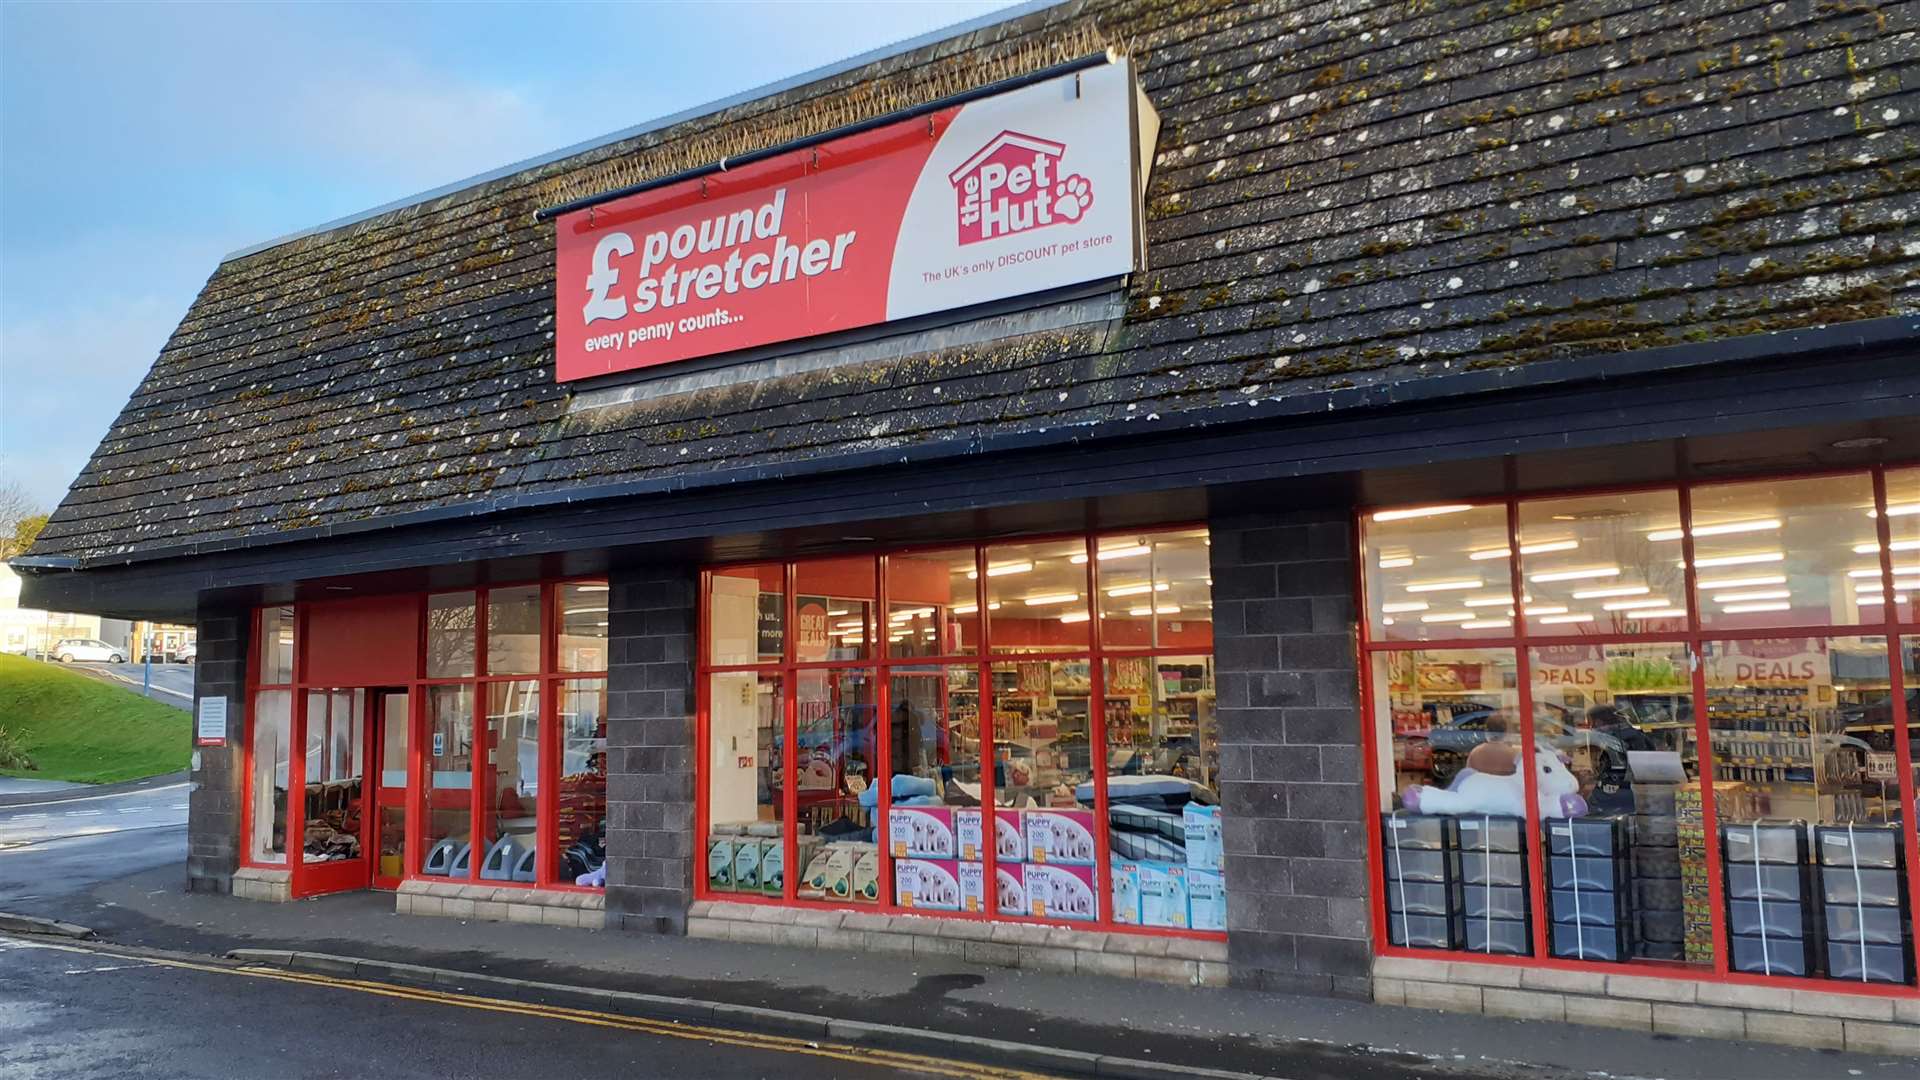 The Poundstretcher store in Wick.